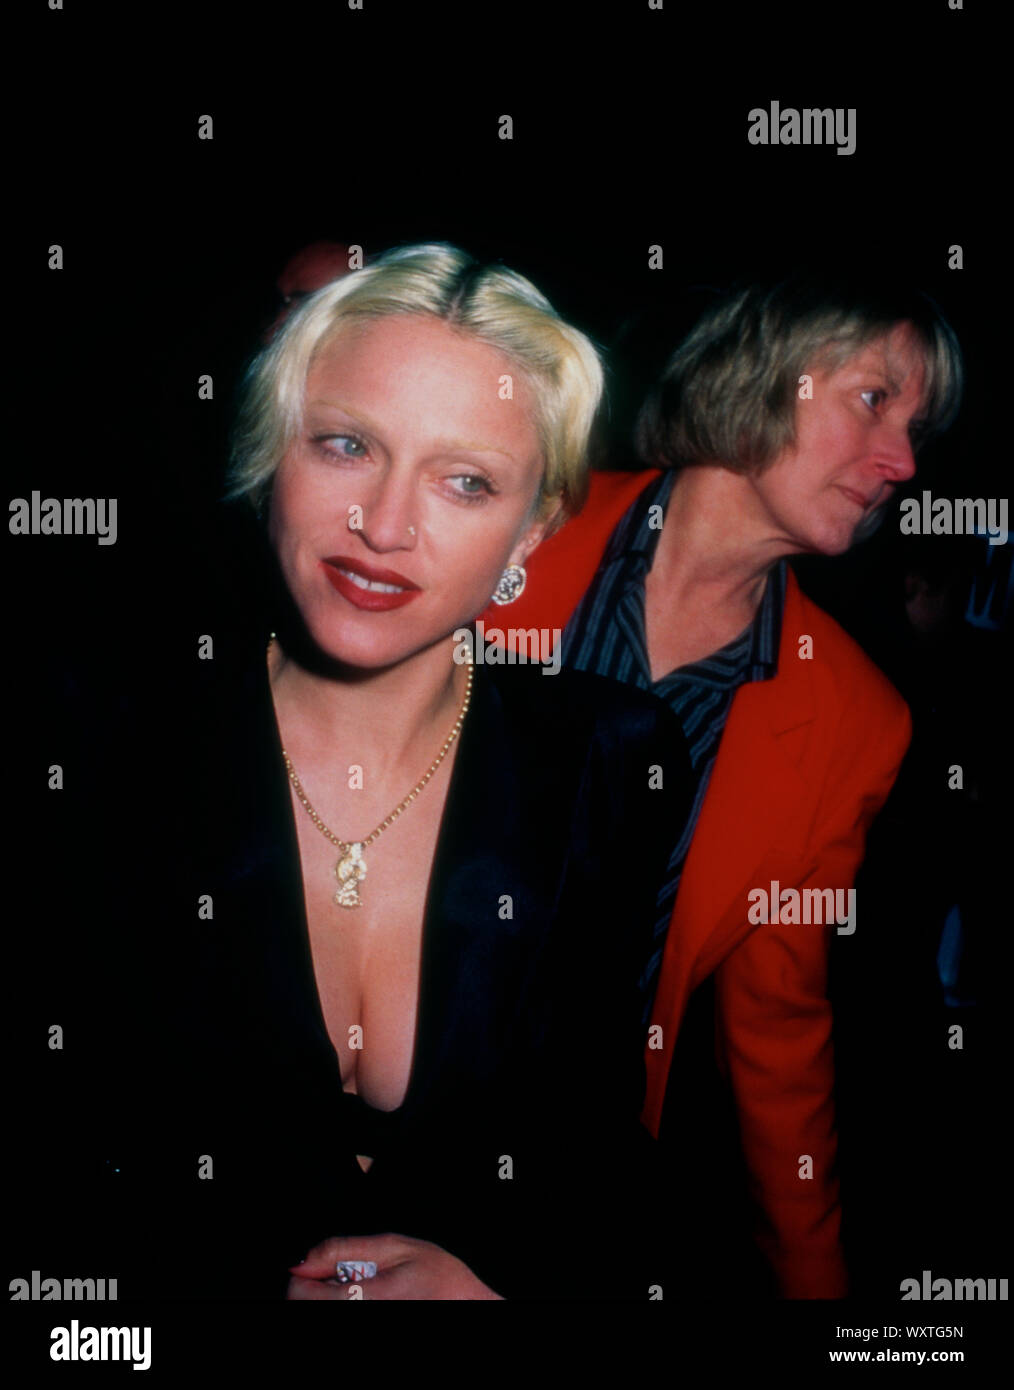 Westwood, California, USA 14th December 1994 Singer Madonna and publicist Pat Kingsley attend the 'Ready To Wear' (Pret-a-Porter) Premiere on December 14, 1994 at the Avco Center Cinemas in Westwood, California, USA. Photo by Barry King/Alamy Stock Photo Stock Photo